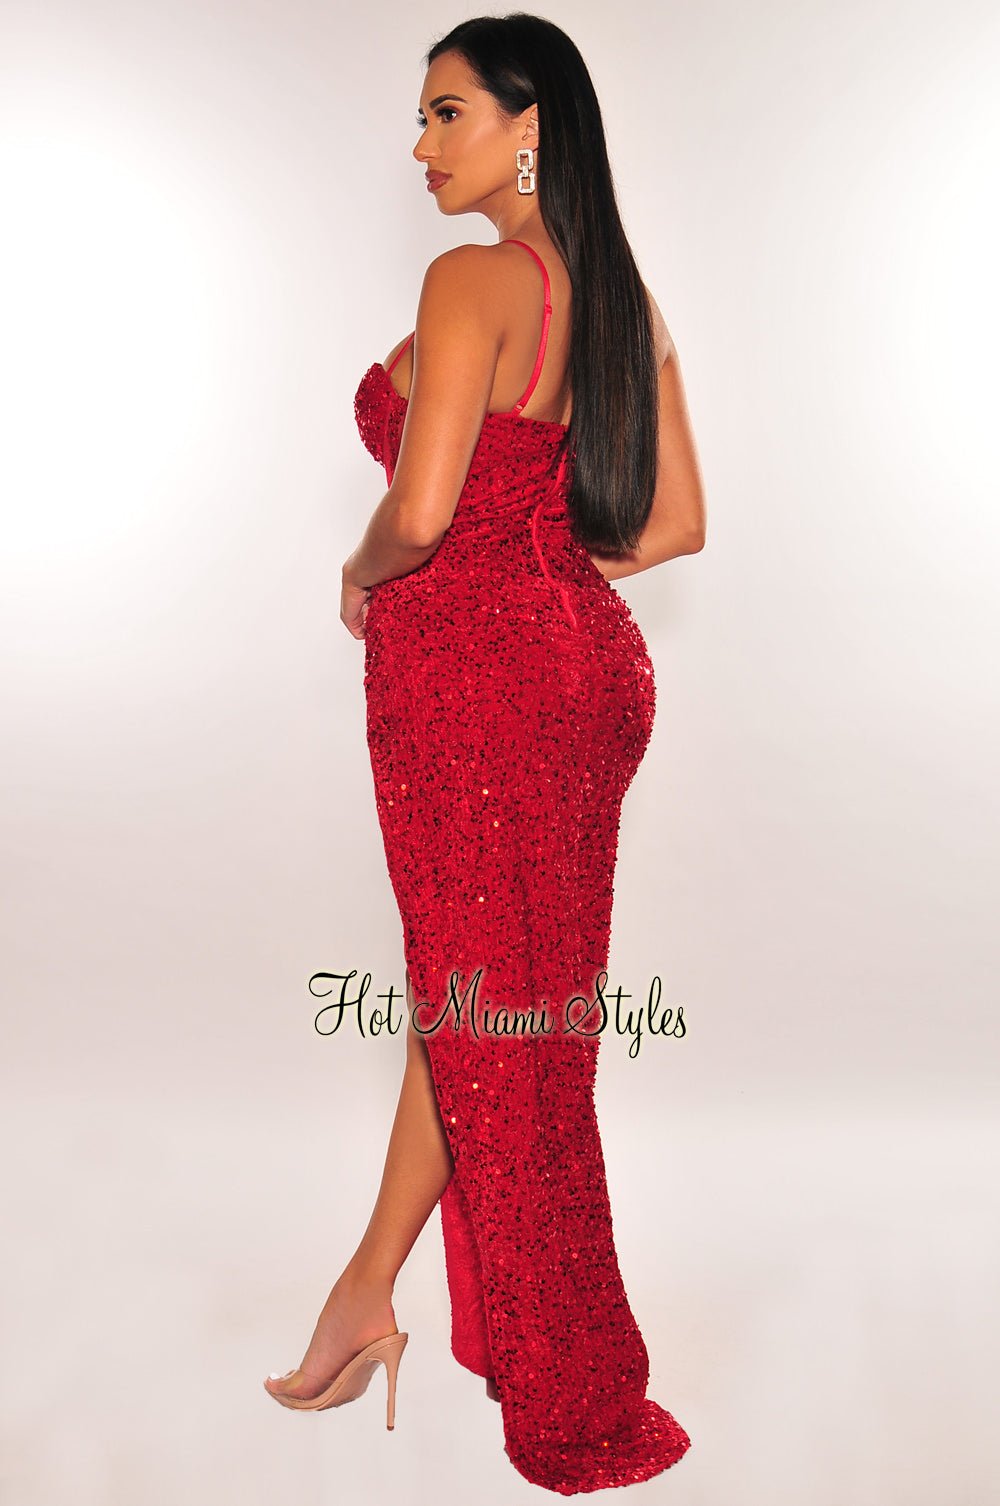 Wine Red Sequin Dress With Spaghetti Straps For Womens Slim Fit